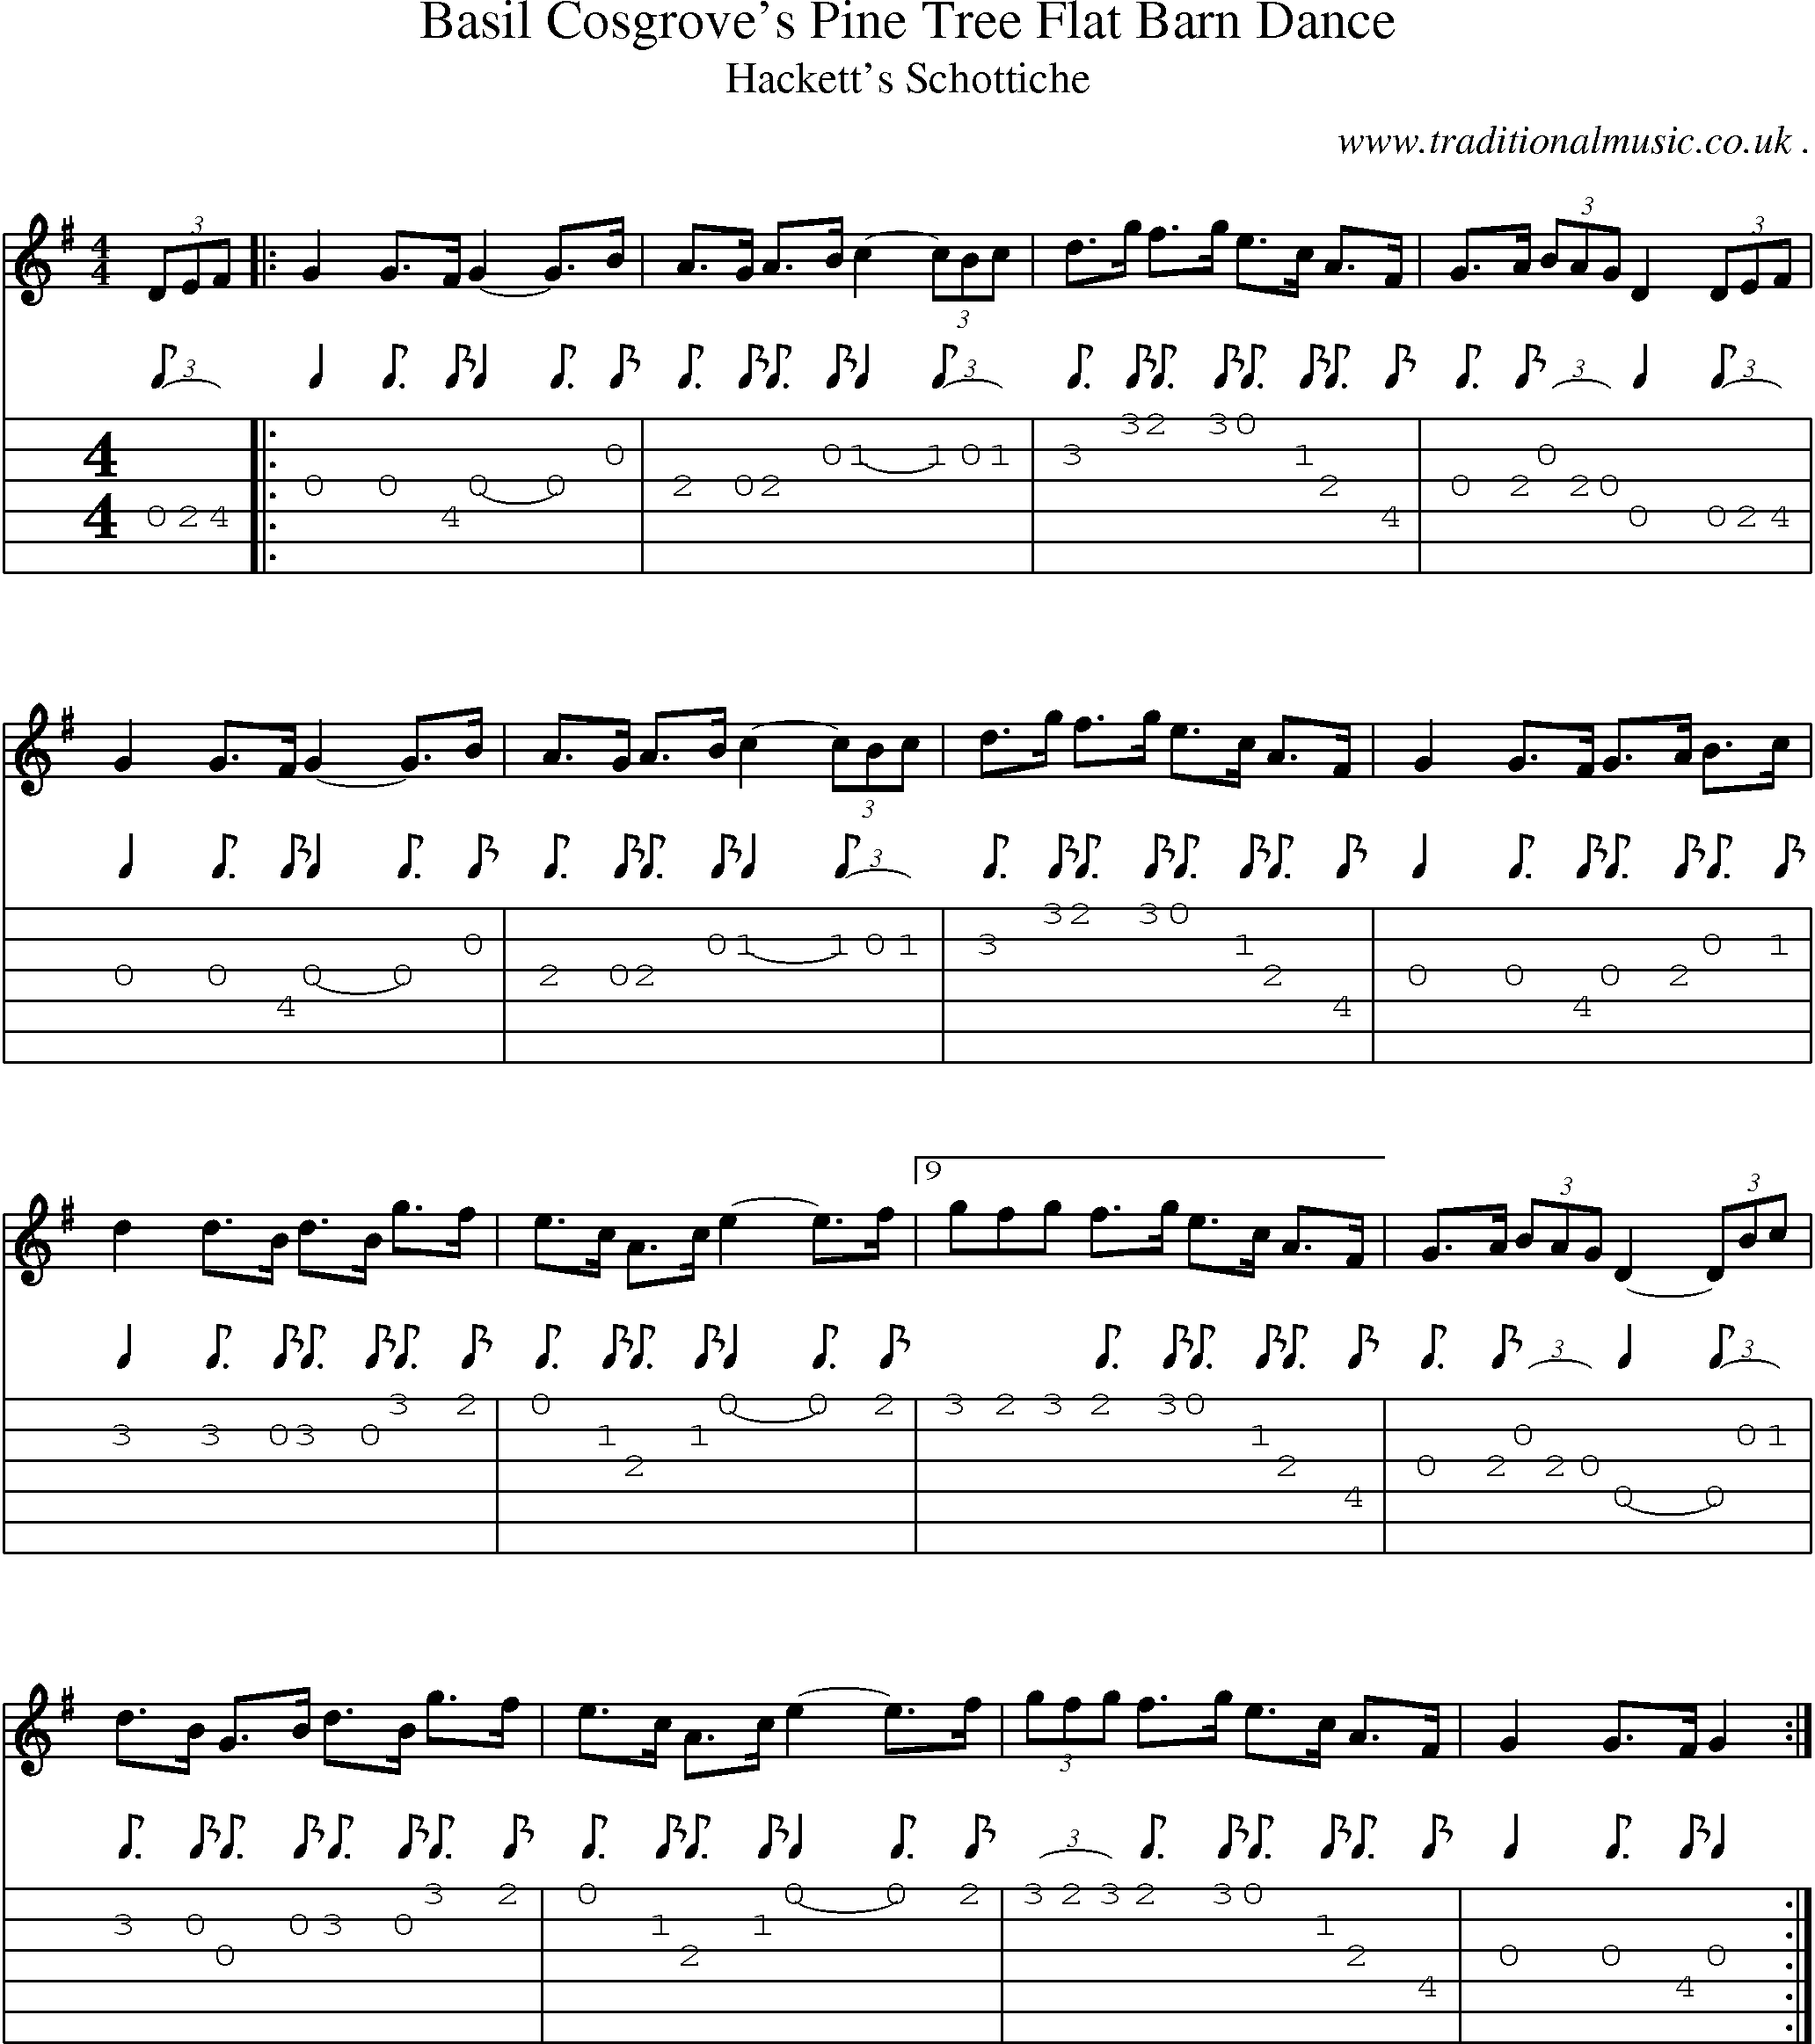 Sheet-Music and Guitar Tabs for Basil Cosgroves Pine Tree Flat Barn Dance